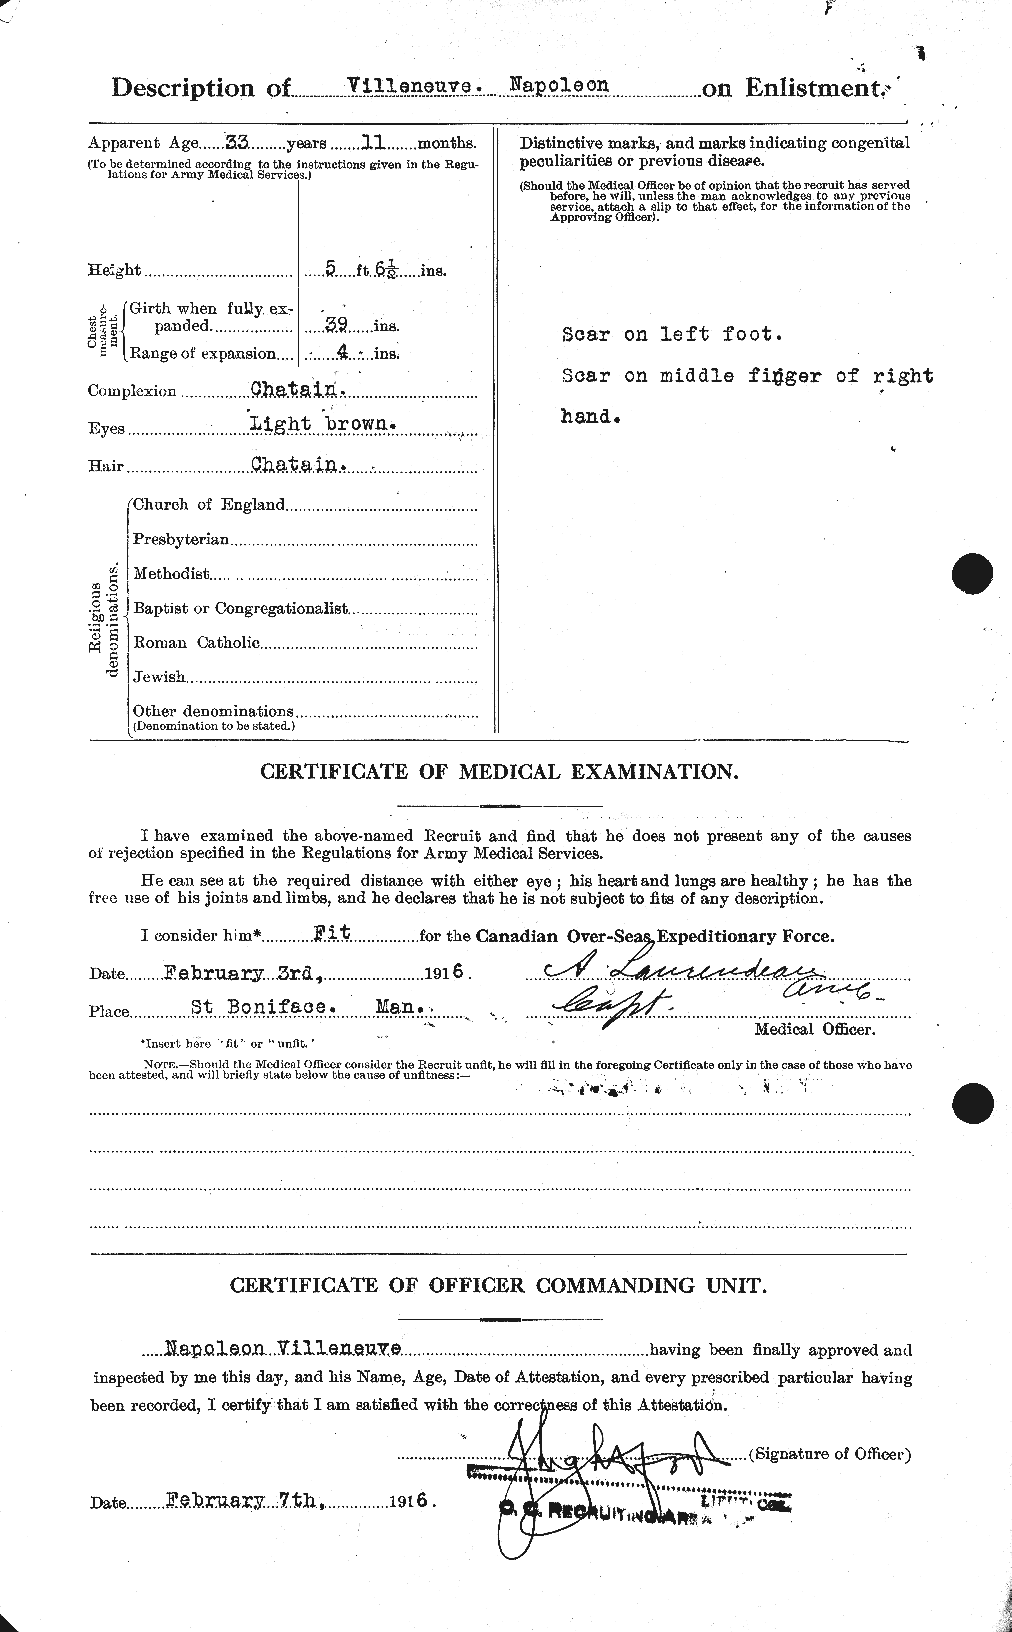 Personnel Records of the First World War - CEF 653867b